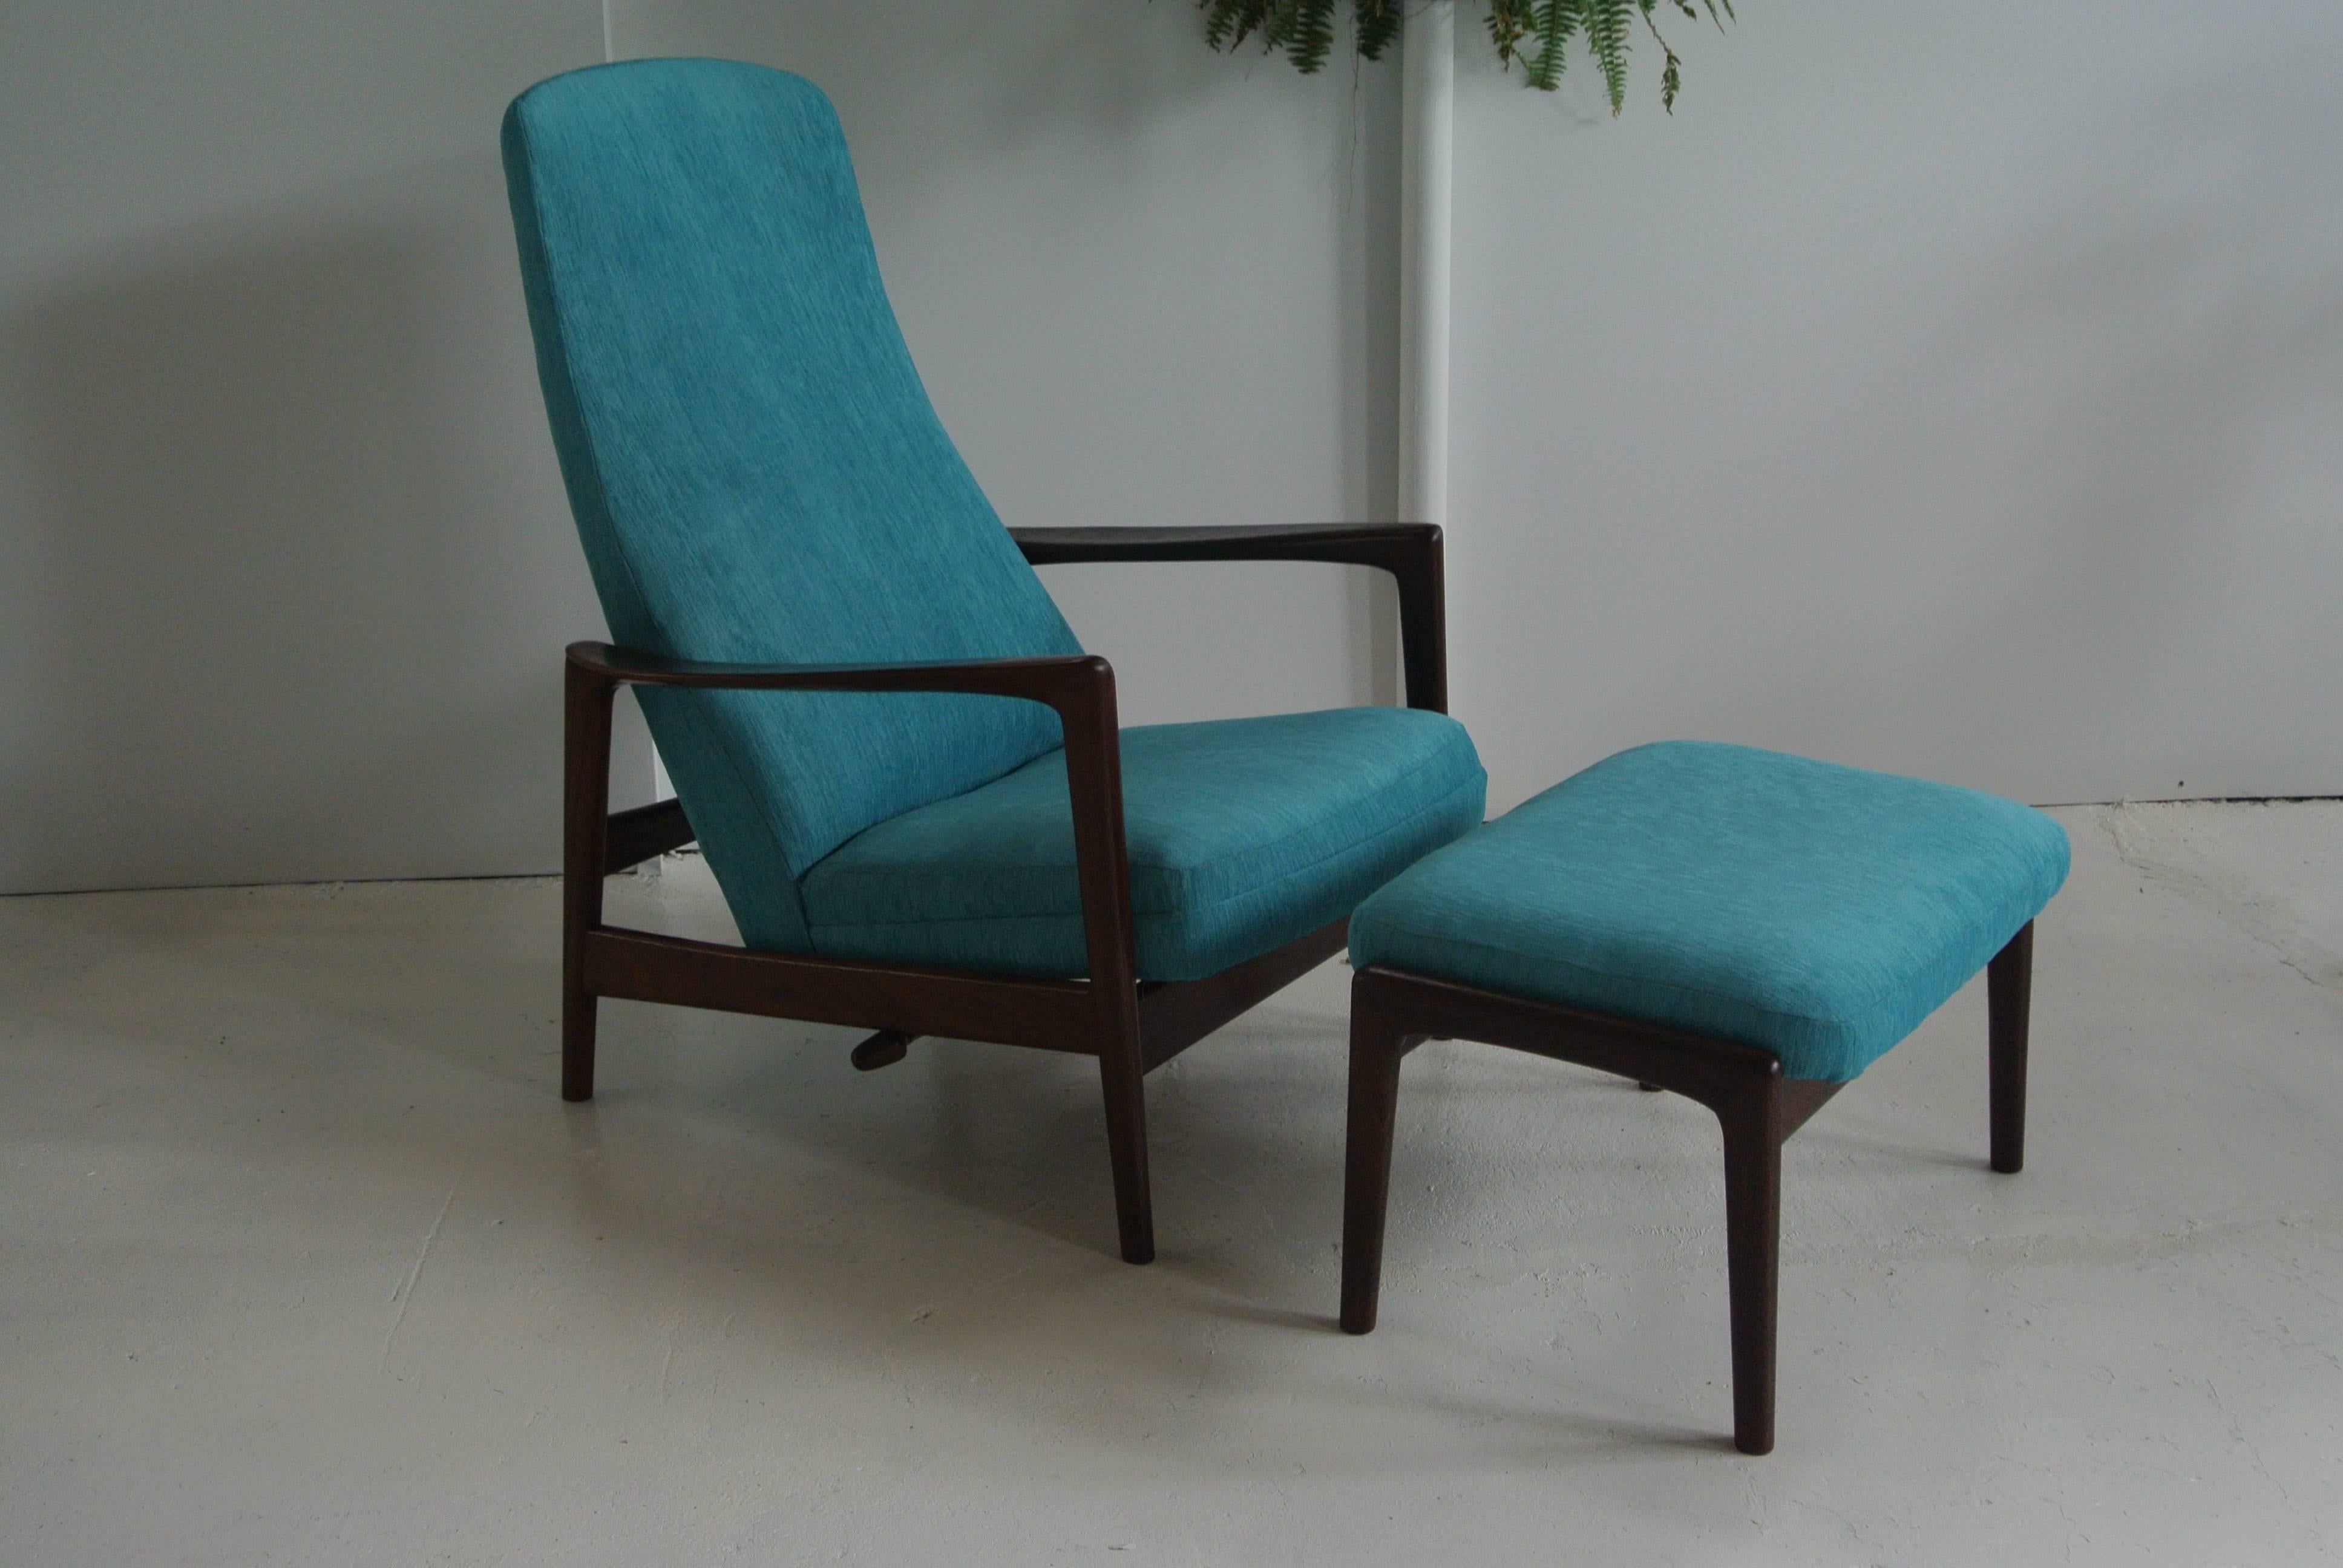 Beautiful newly refinished reclining lounge chair in teak by Alf Svensson for DUX of Sweden. The chair reclines to three settings and the ottoman cushions inclines. Cushions and upholstery are new.